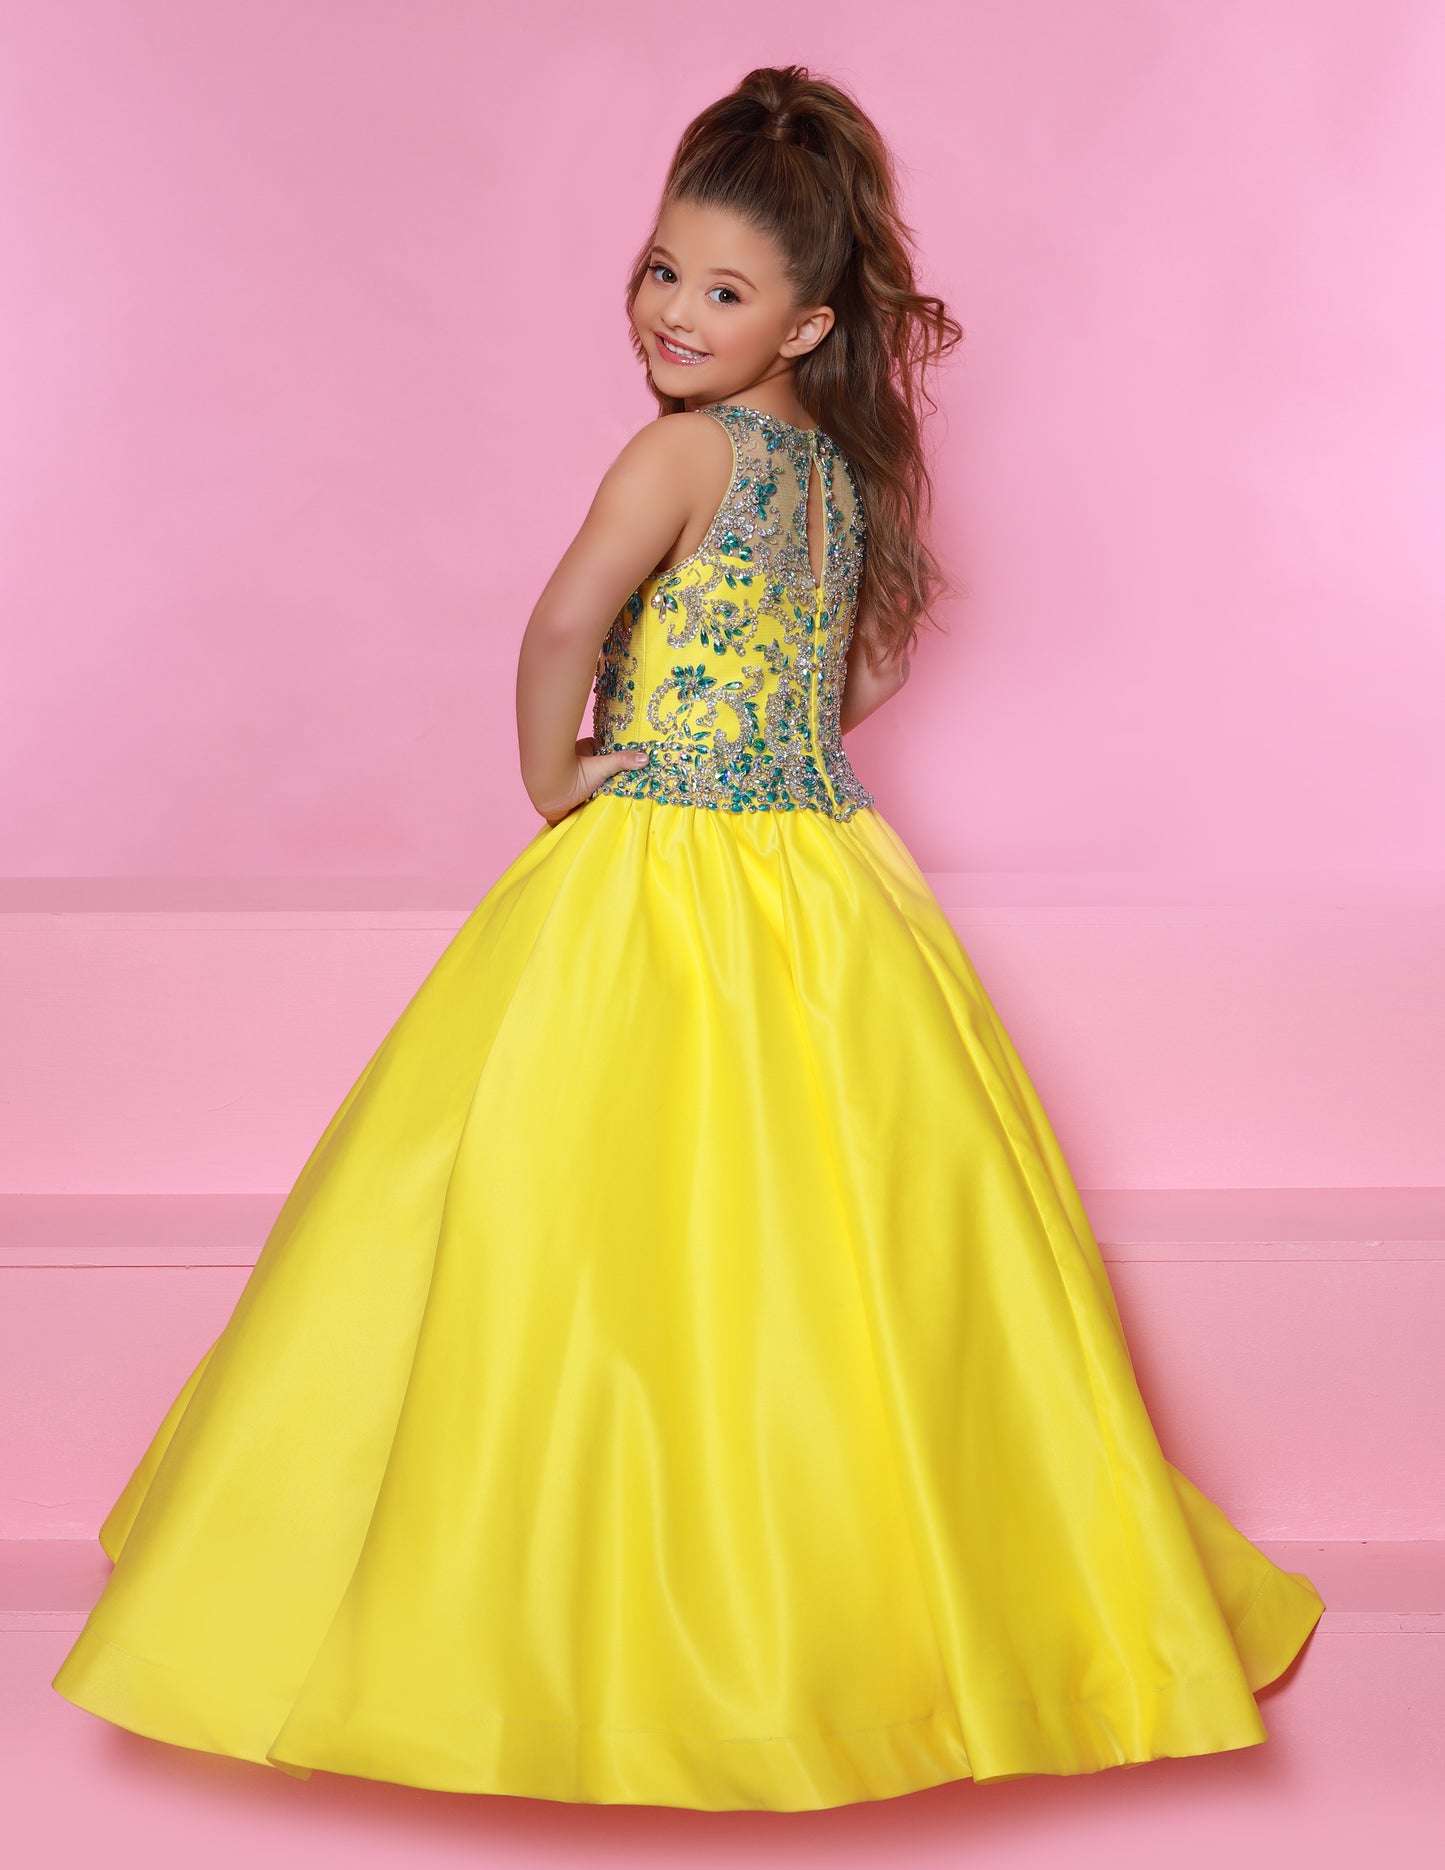 Sugar Kayne C158 Is a long sating A Line Ballgown girls Pageant Dress. Featuring a fully embellished bodice with a sheer illusion high neckline.  Colors: Lemon/Aqua, White/Aqua  Sizes:  2-16  (Sizes 2-6 do not have bust cups, Sizes 8-16 will have preteen size bust cups)